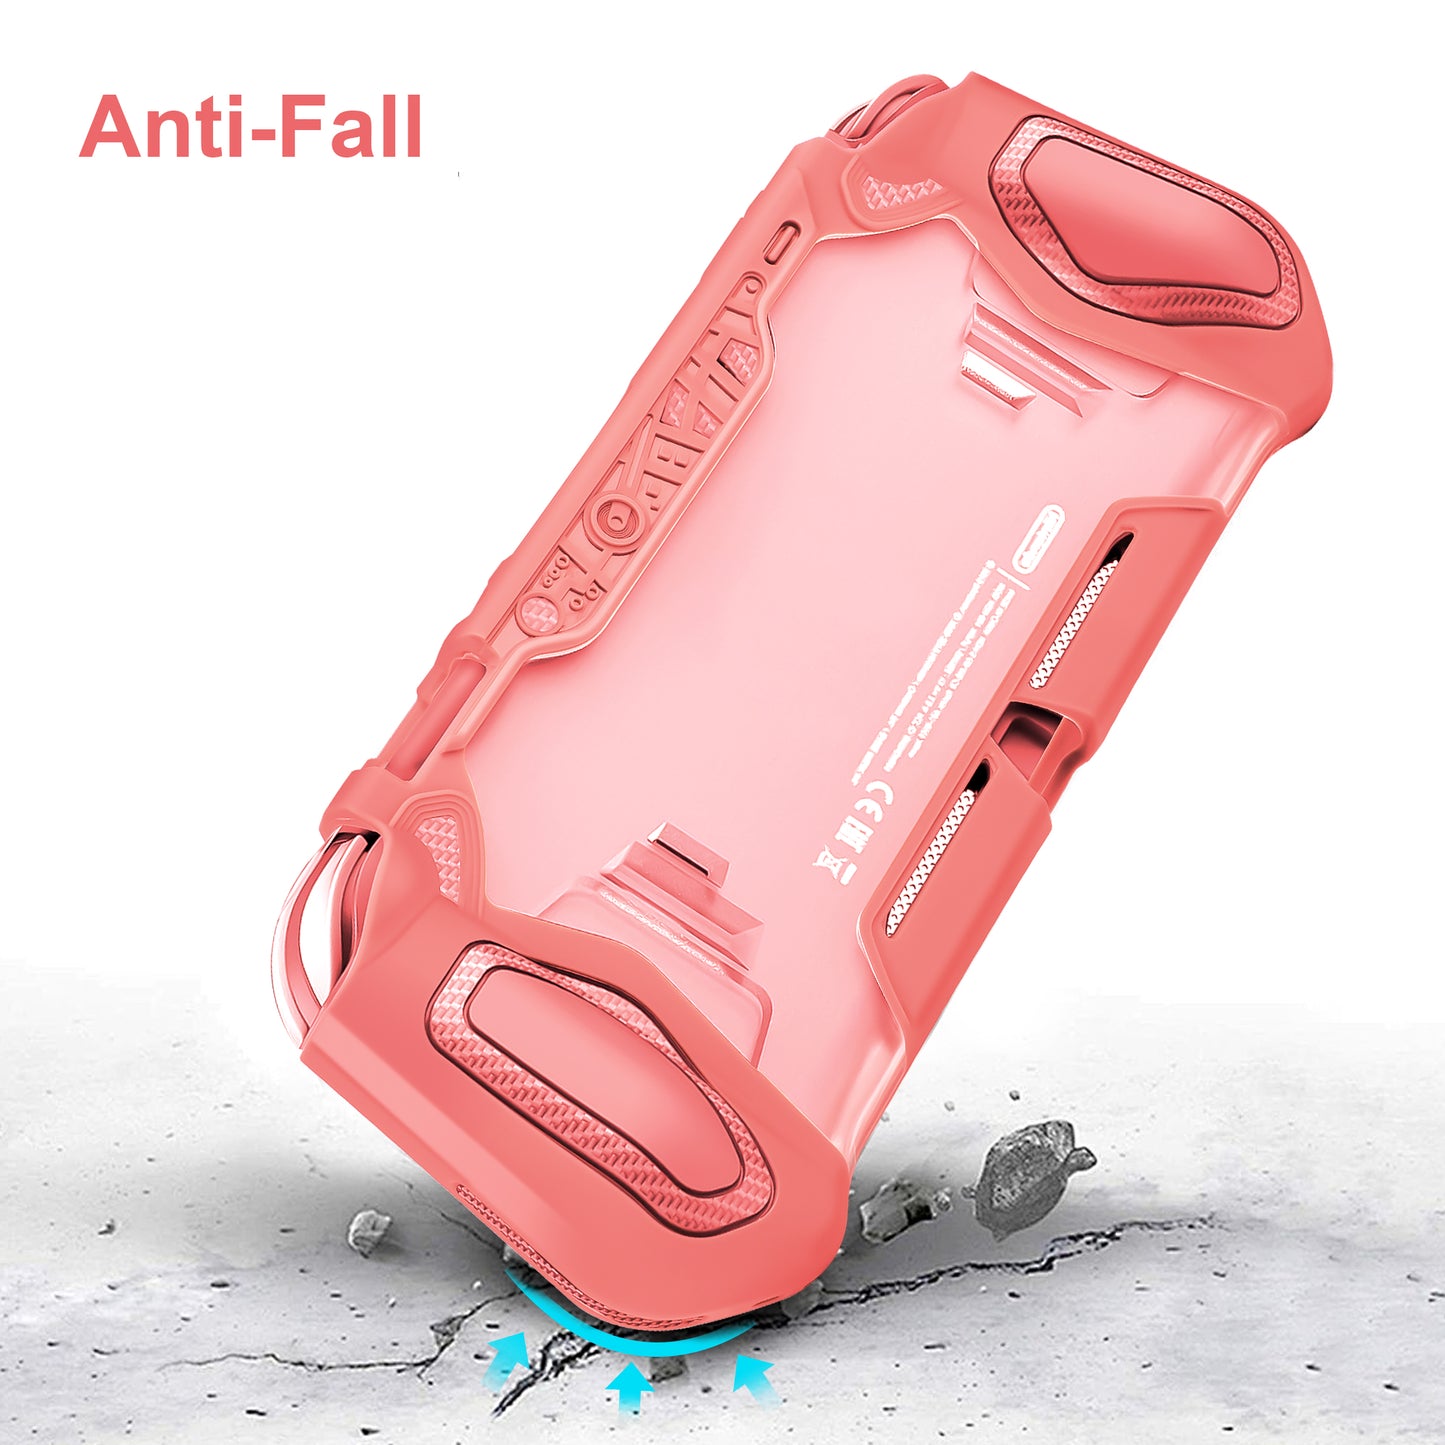 TPU Protective Cover Case Fit for Nintendo Switch Lite - Shockproof Grip Handle Hard Shell with Ergonomic Grip, Shockproof Anti-Scratch (Coral)